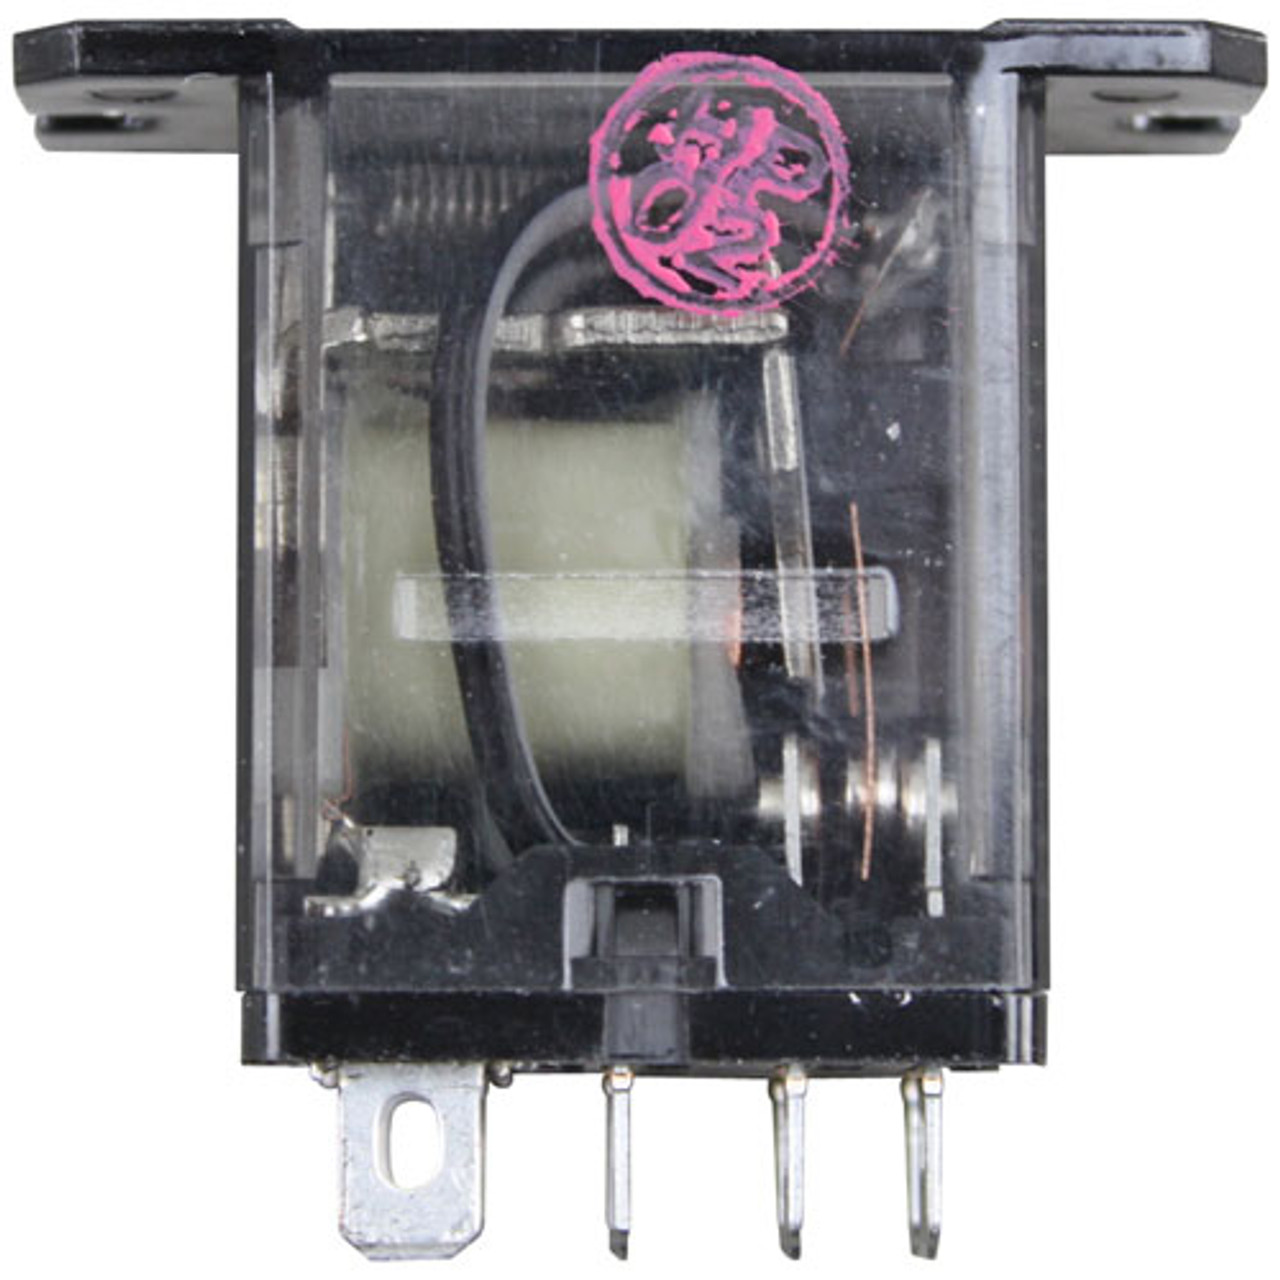 Relay - Main Power - Replacement Part For Star Mfg 2E-Z14428